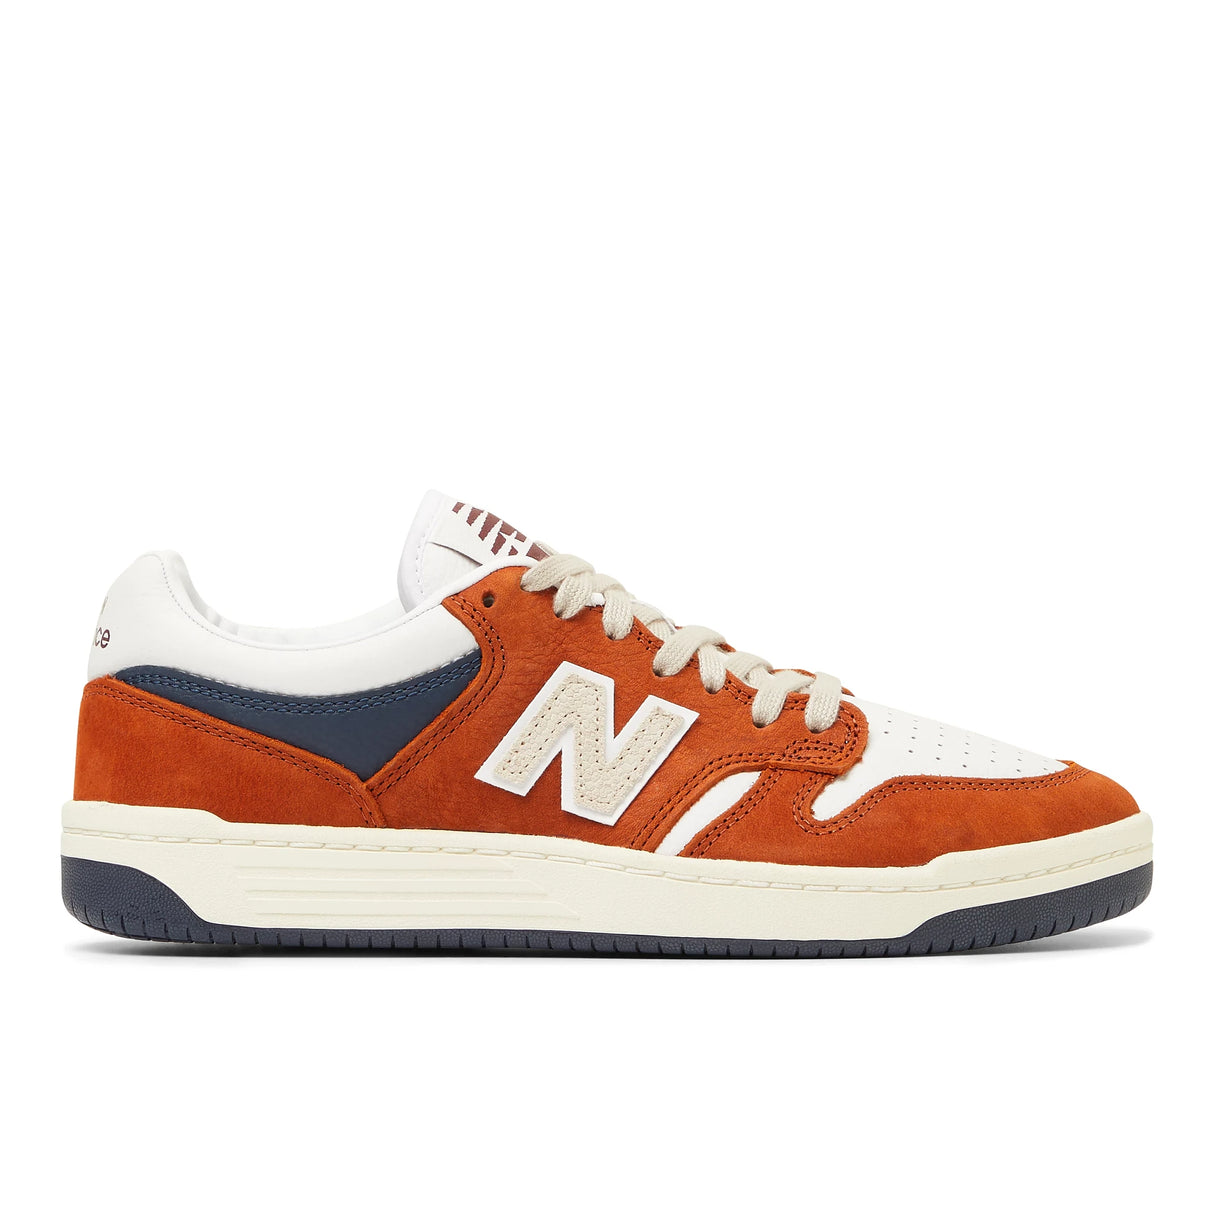 New Balance Numeric 480 Brown/White Shoes